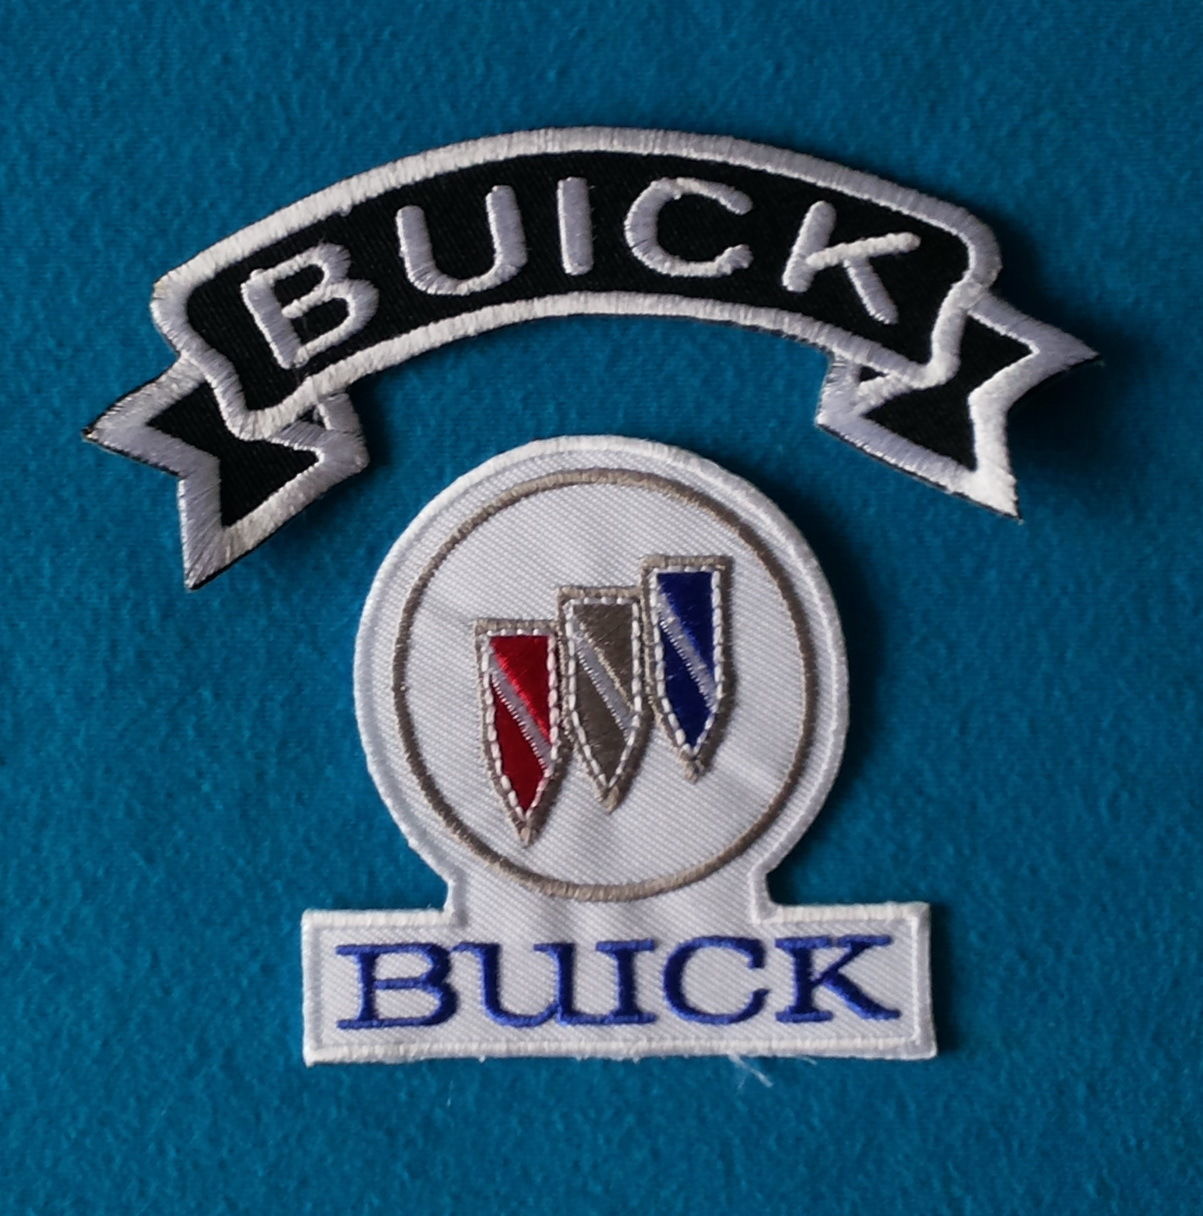 Cool Buick Patches